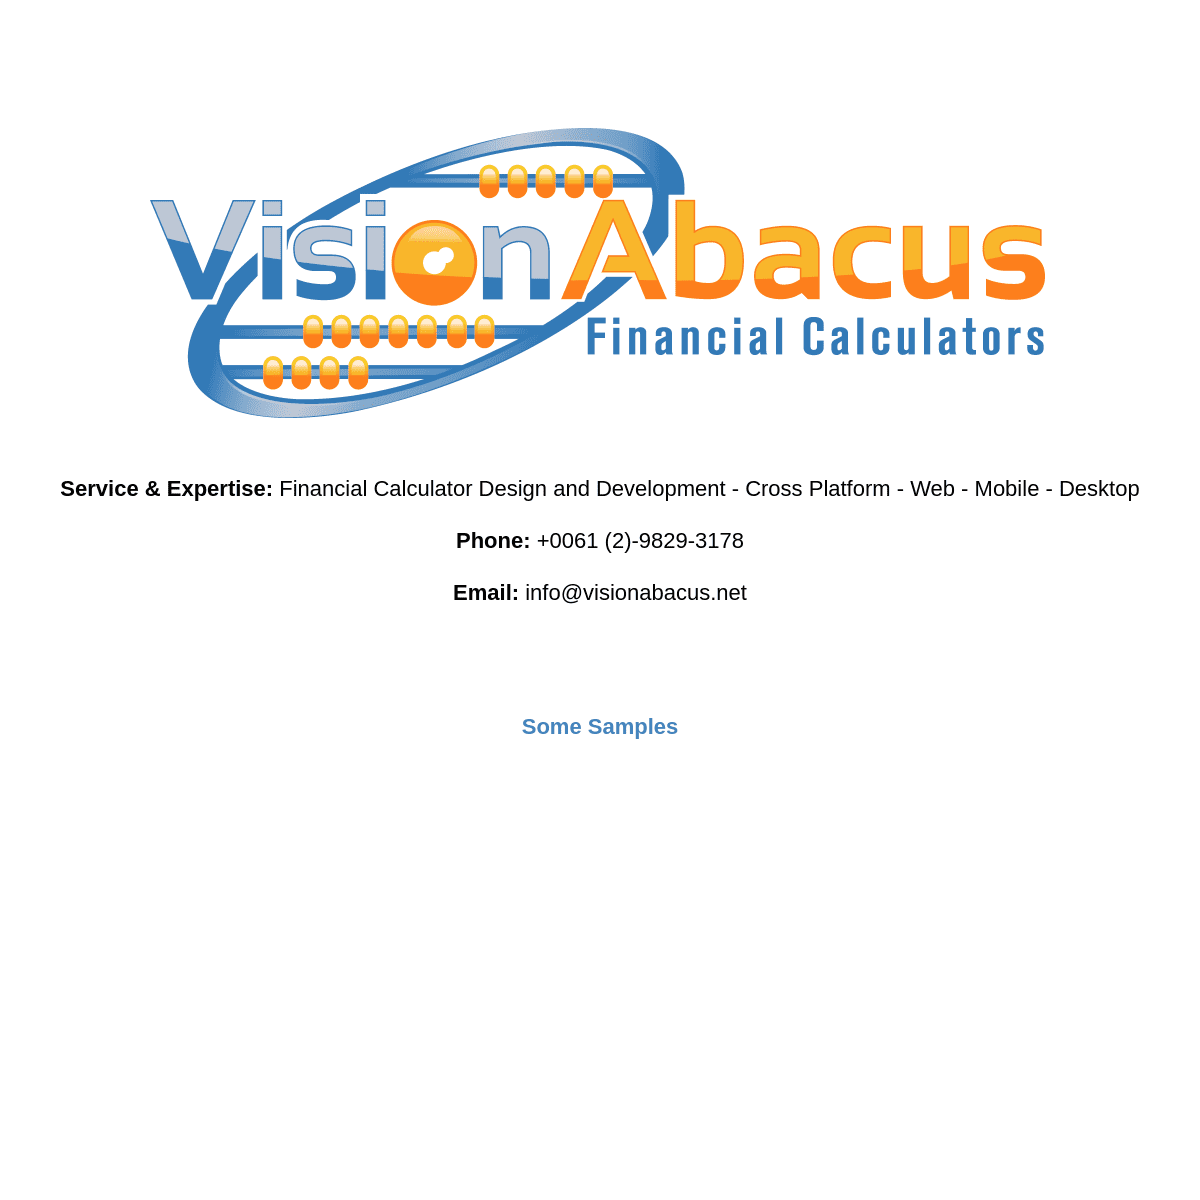 A complete backup of https://visionabacus.com